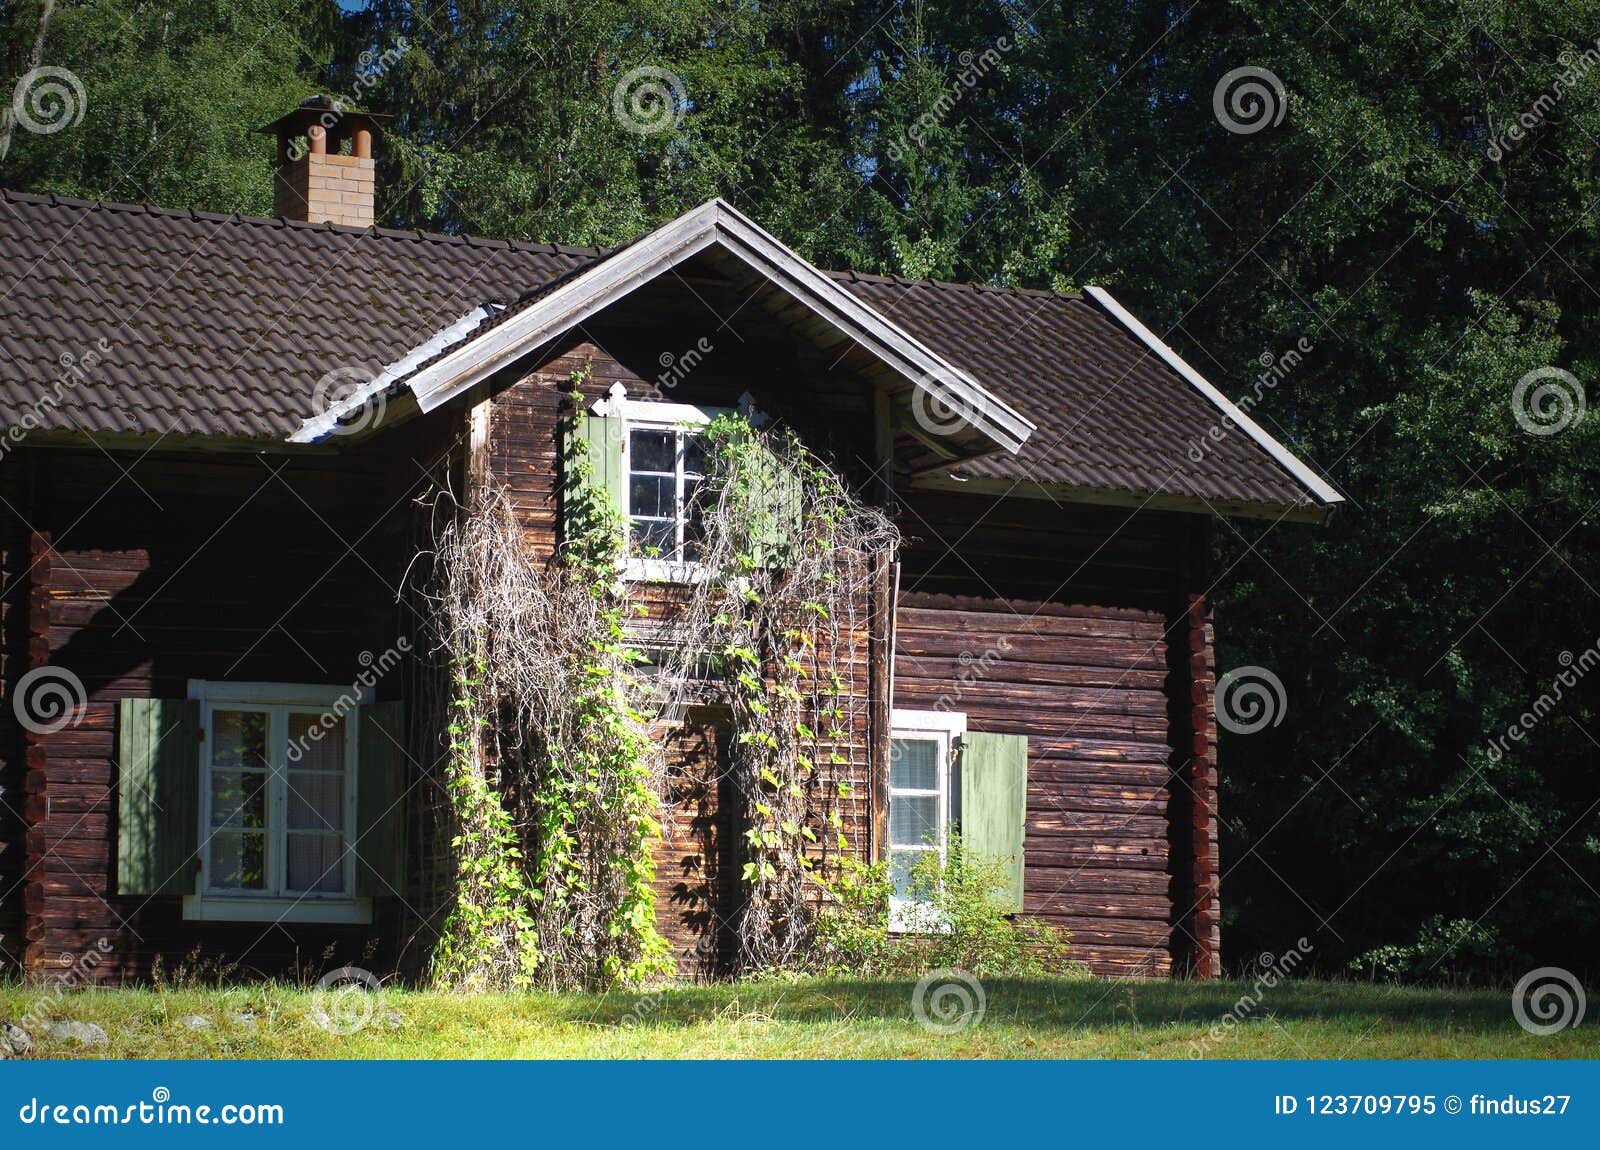 A Log Cabin In A Forest Stock Image Image Of Nature 123709795